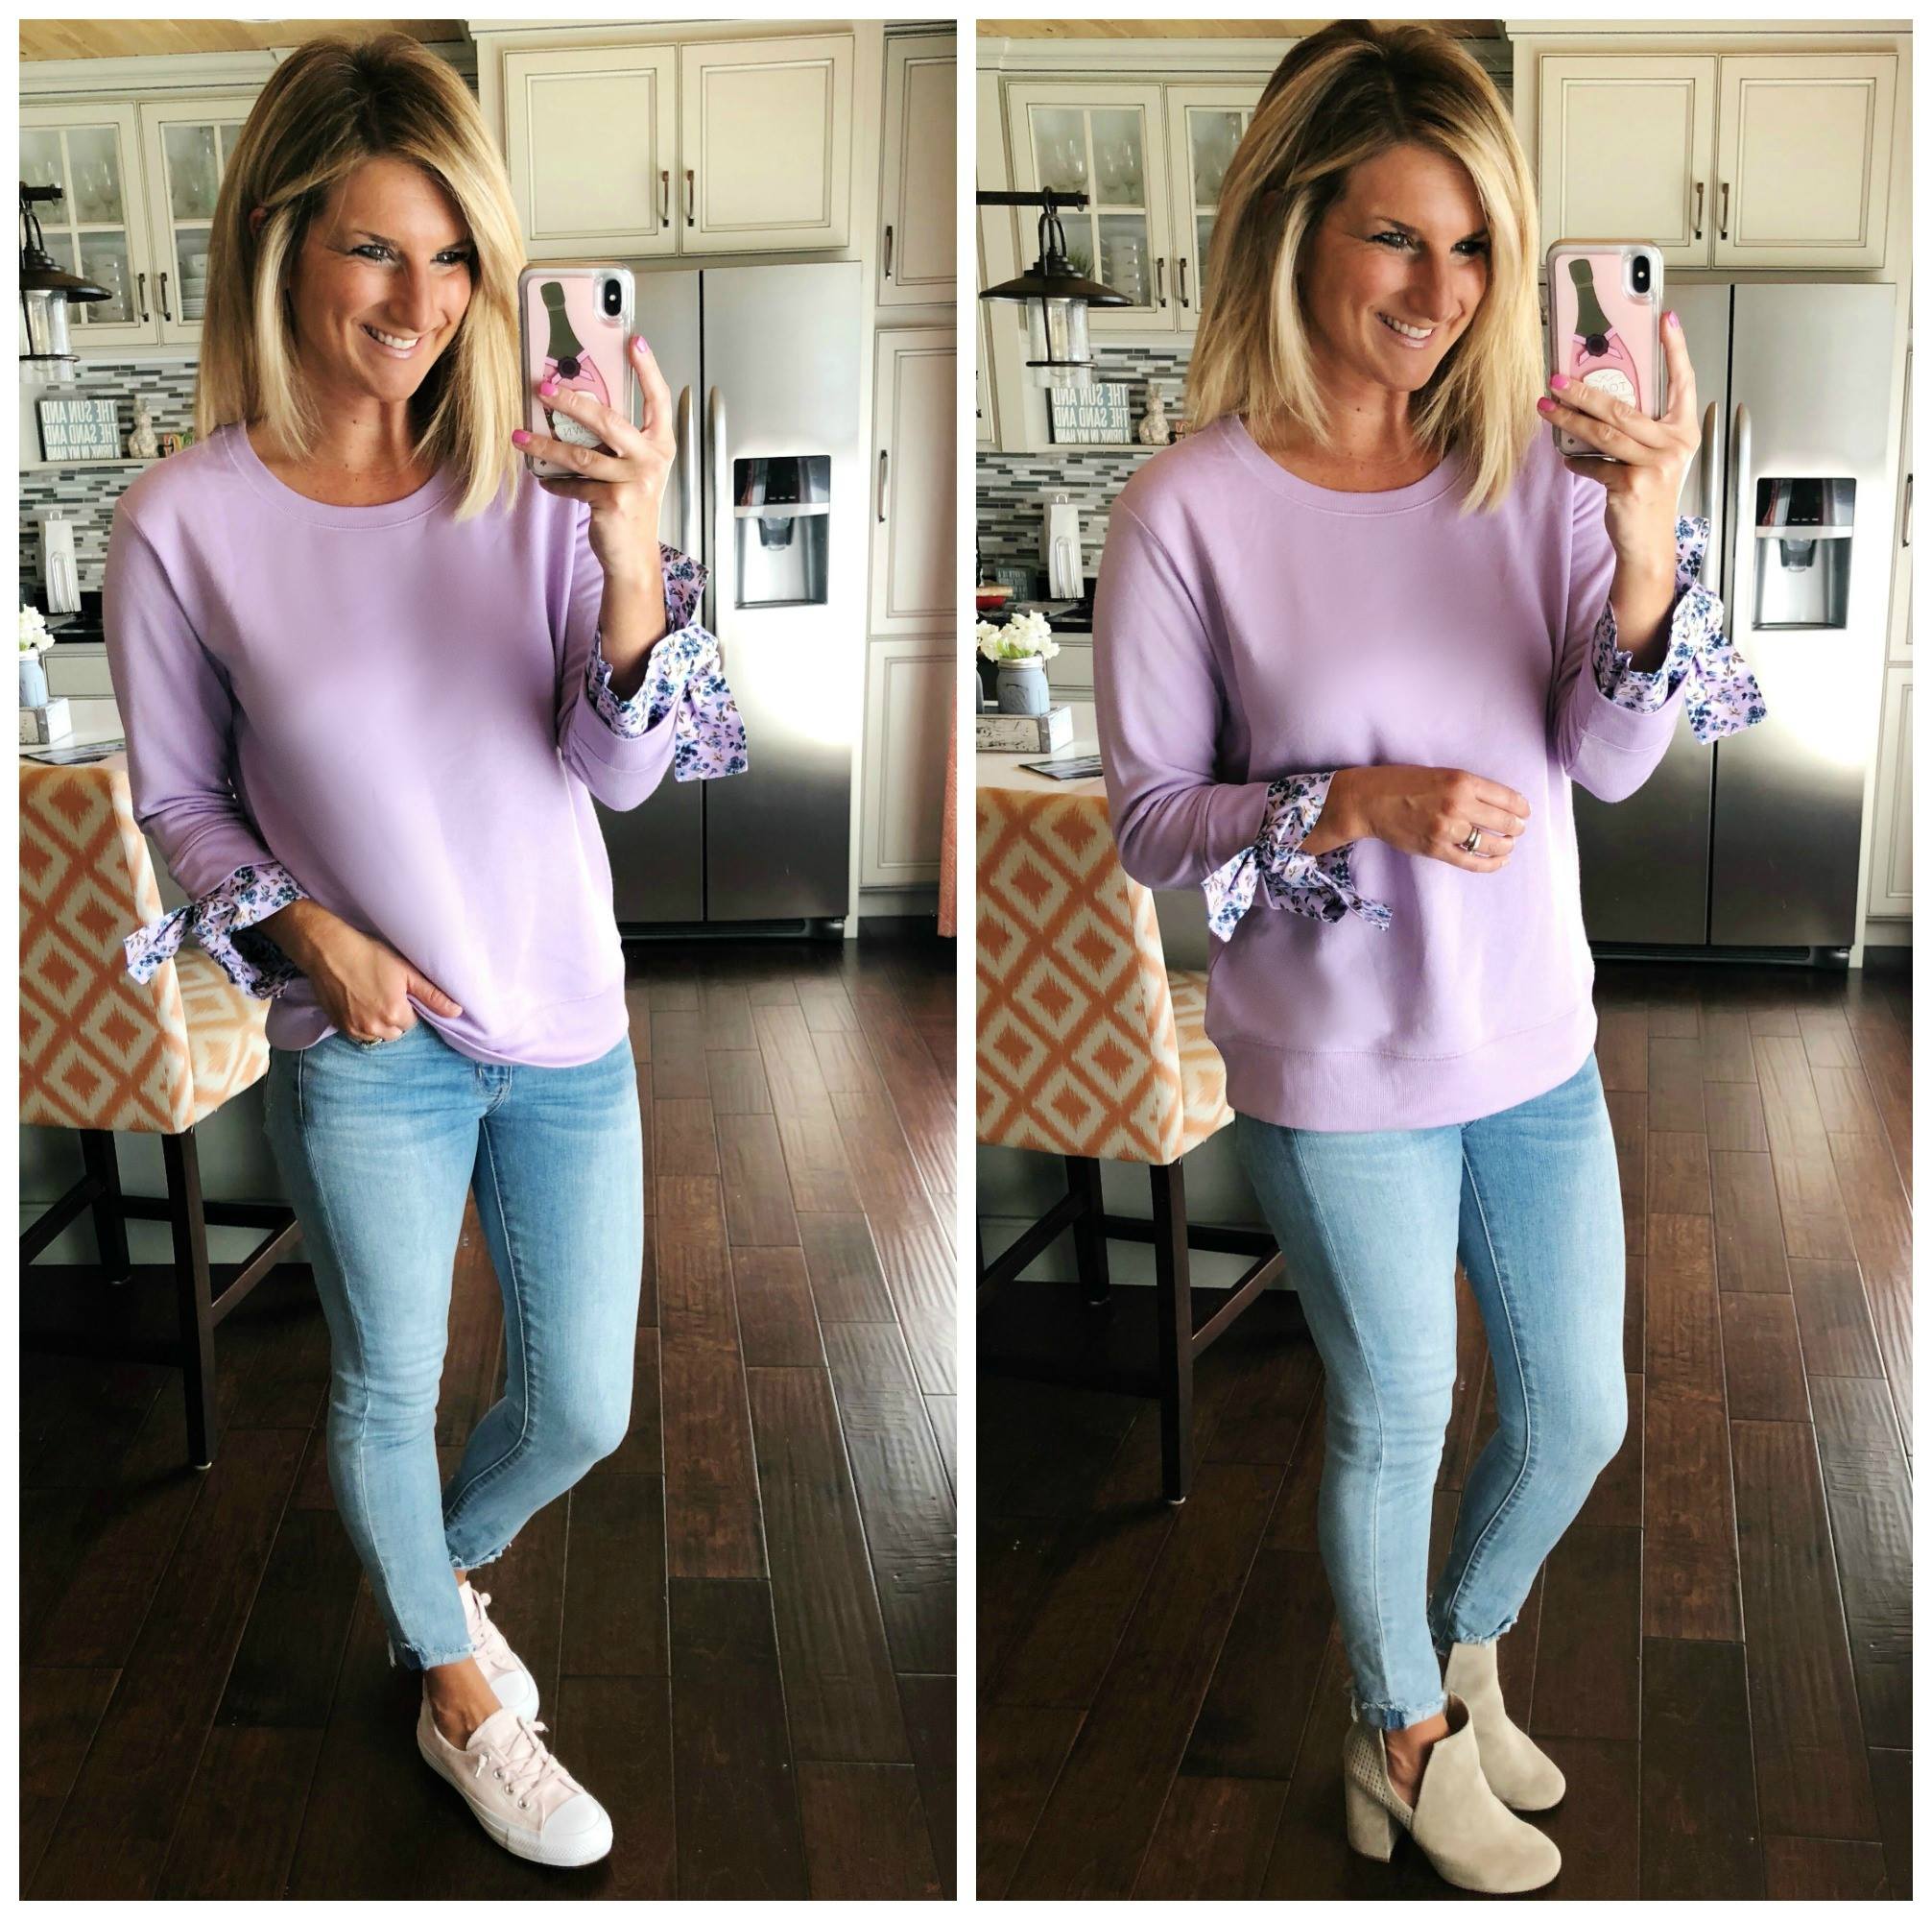 Floral Print Cuff Top // Cuffed Top with Cropped Jeggings and Cutout Booties or Blush Sneakers // Perfect Spring Sweatshirt 